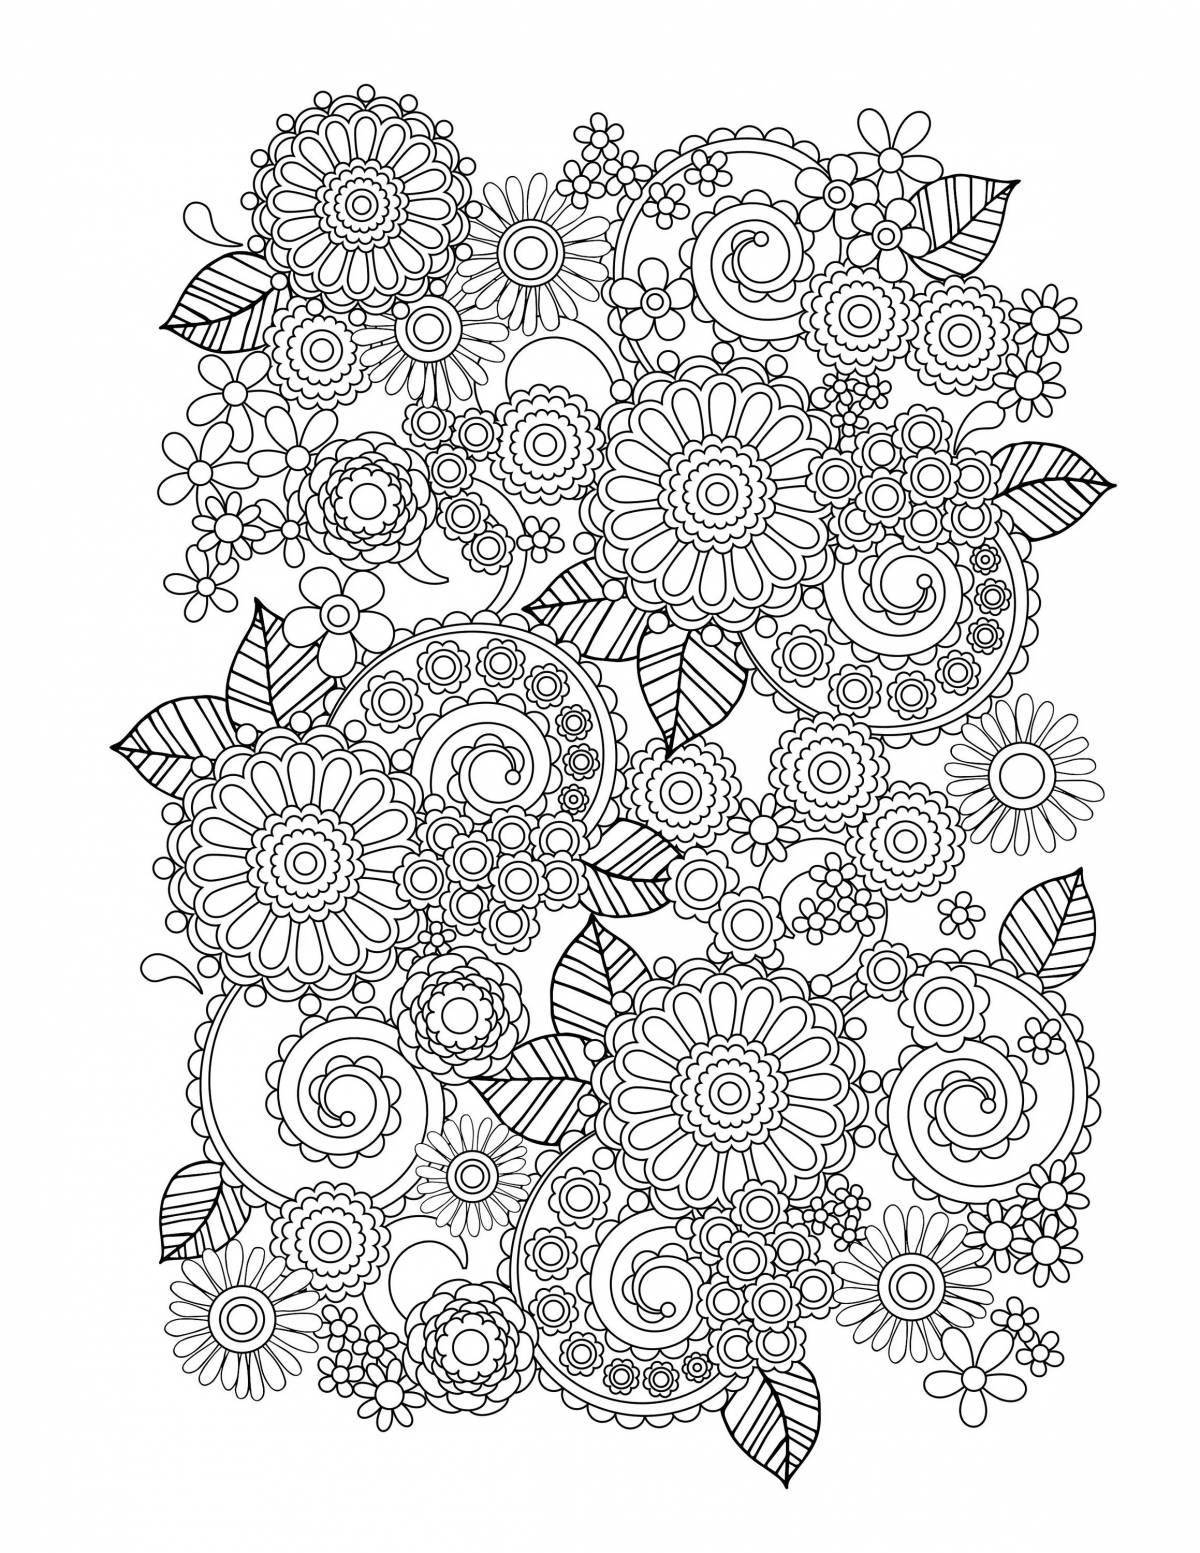 Blissful wildberry antistress coloring book